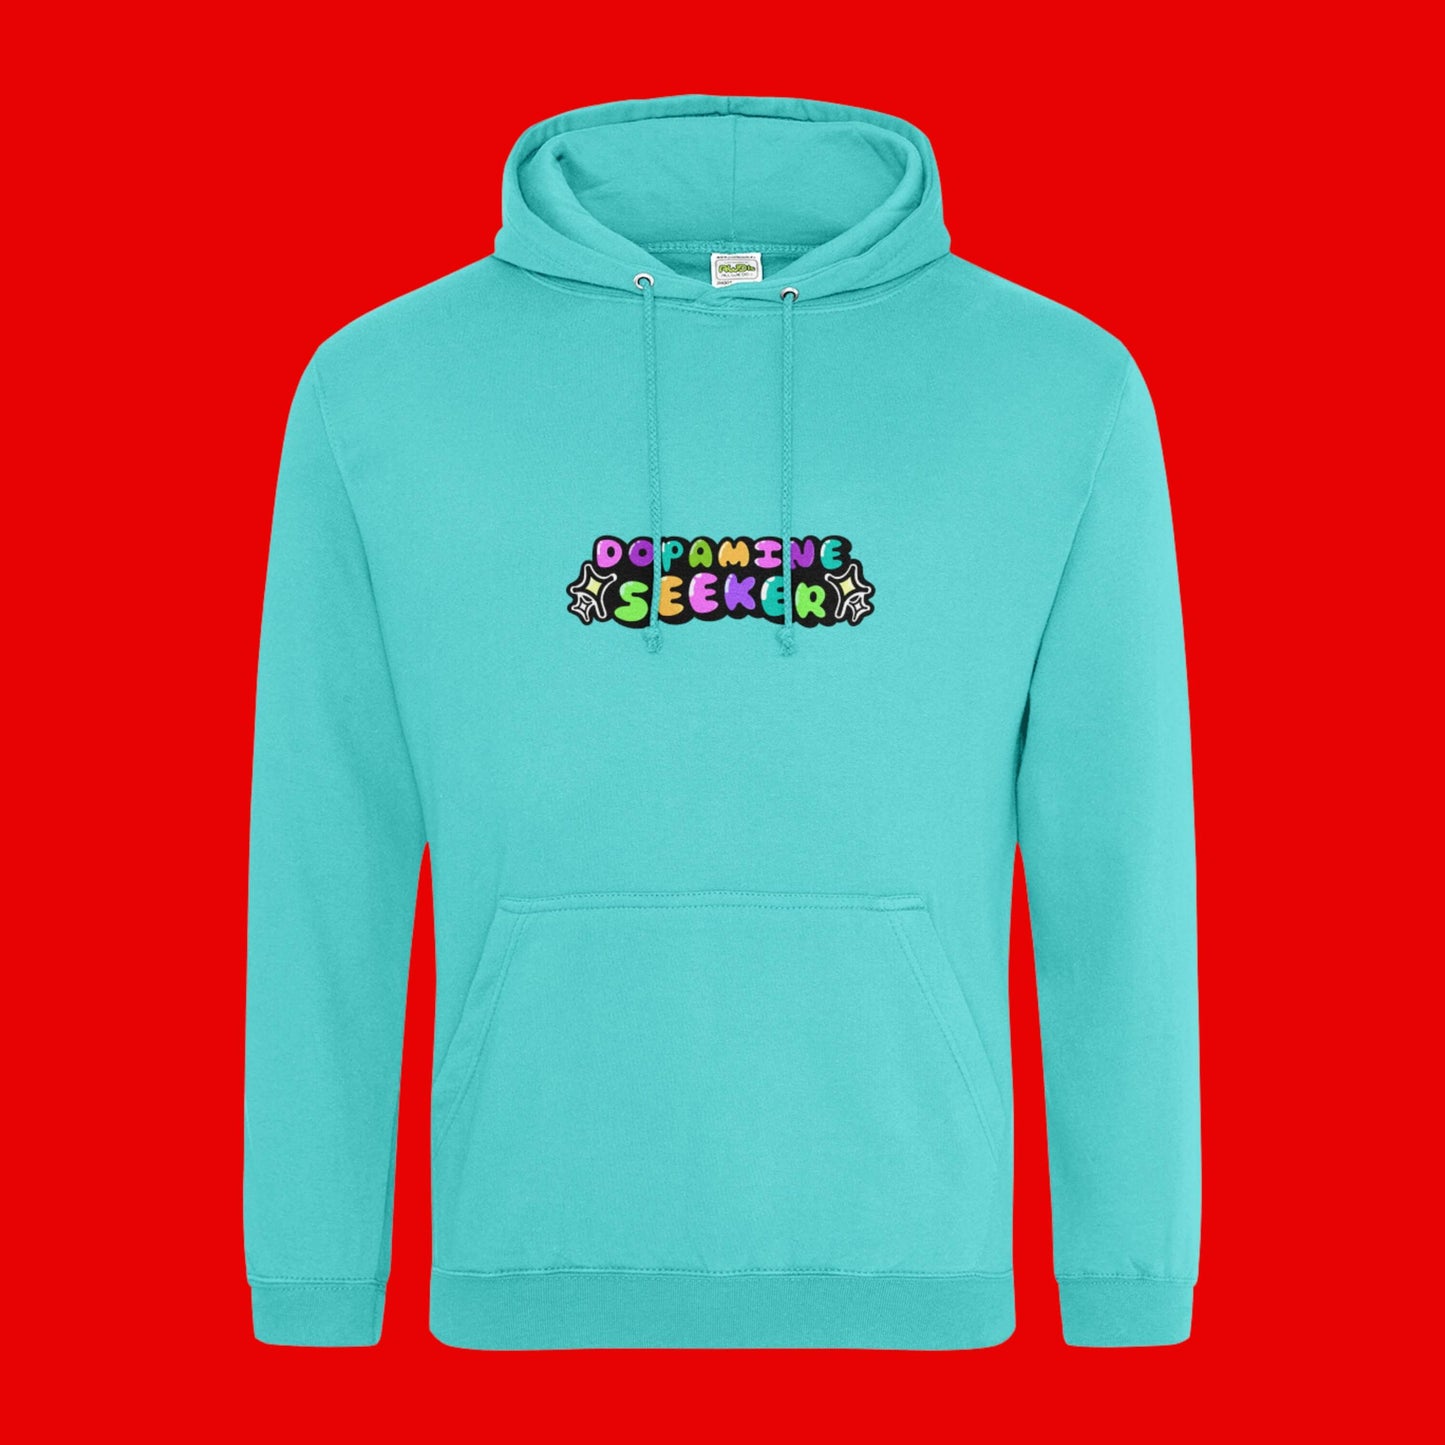 The Dopamine Seeker Hoodie in turquoise surf on a red background. The hoodie design has 'dopamine seeker' written in the middle in rainbow bubble font and black sparkle outlines. The hoodie has pastel teal drawstrings and a large centre pocket. Design is raising awareness for ADHD and neurodivergence.